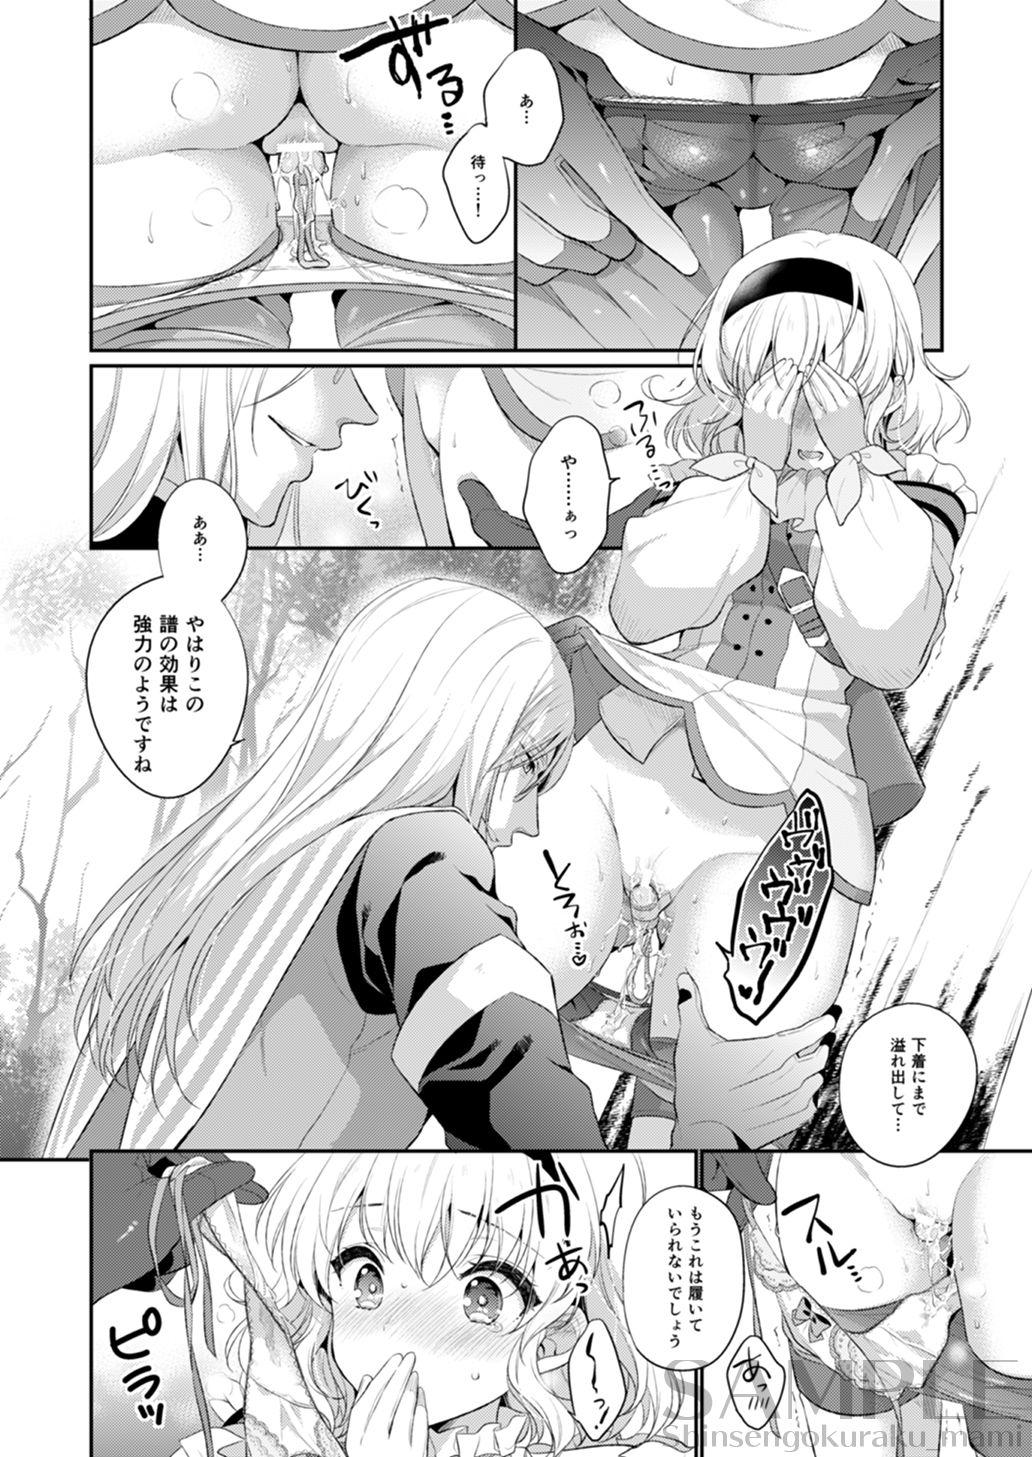 Dildo dolcemente - Tales of the abyss Slim - Page 11